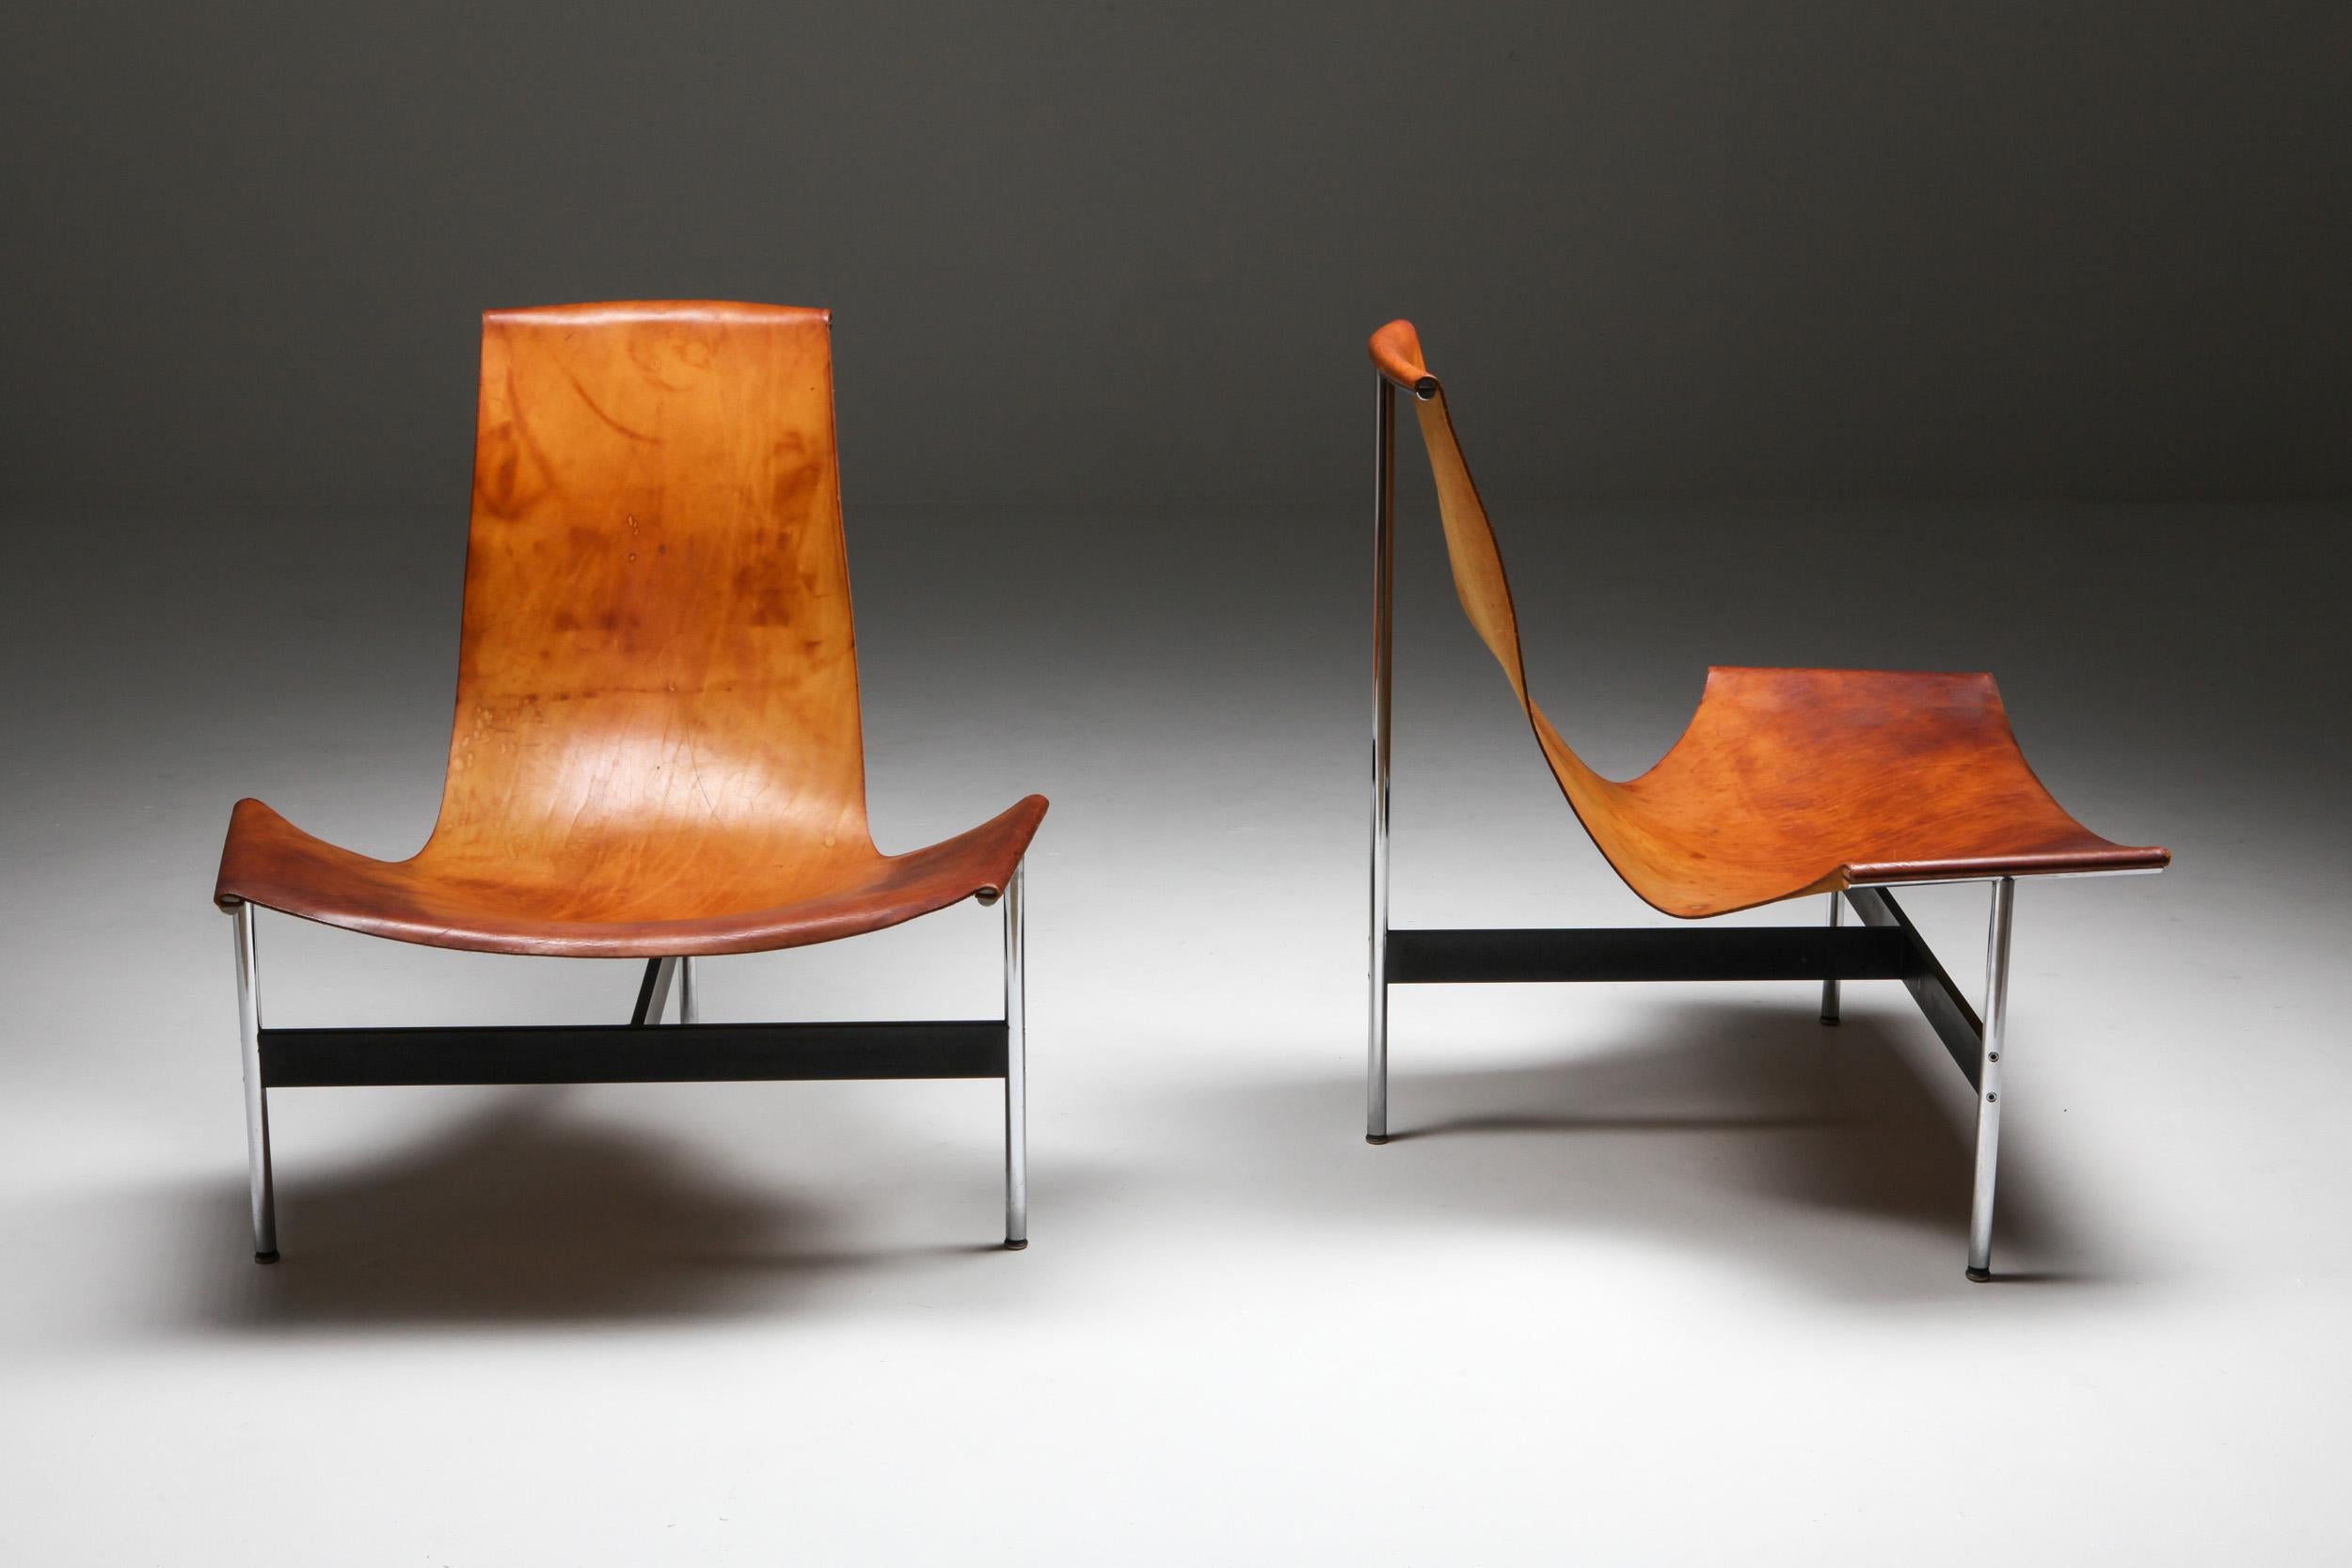 William Katavolos, Kelley and Littell, Laverne International, chrome-plated steel, enameled steel and leather, United States, 1952; Lounge chair; Side chair; Living room set; American Design; New York. One chair available.

In 1952 William